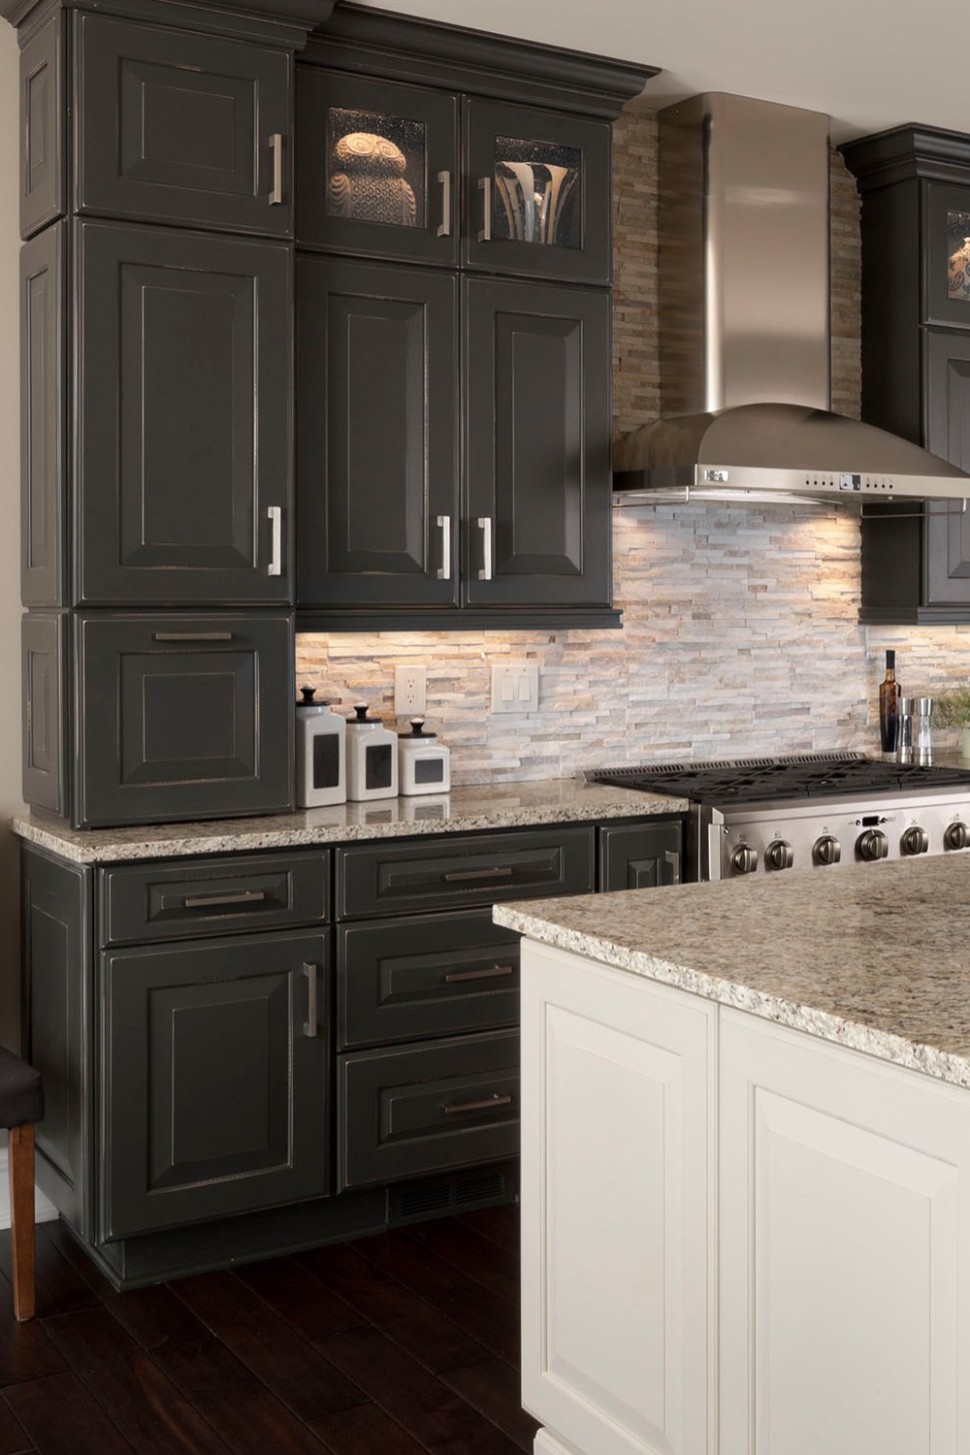 5+ Modern Charcoal Gray Kitchen Cabinets ( Dark or Light) - charcoal gray kitchen cabinets